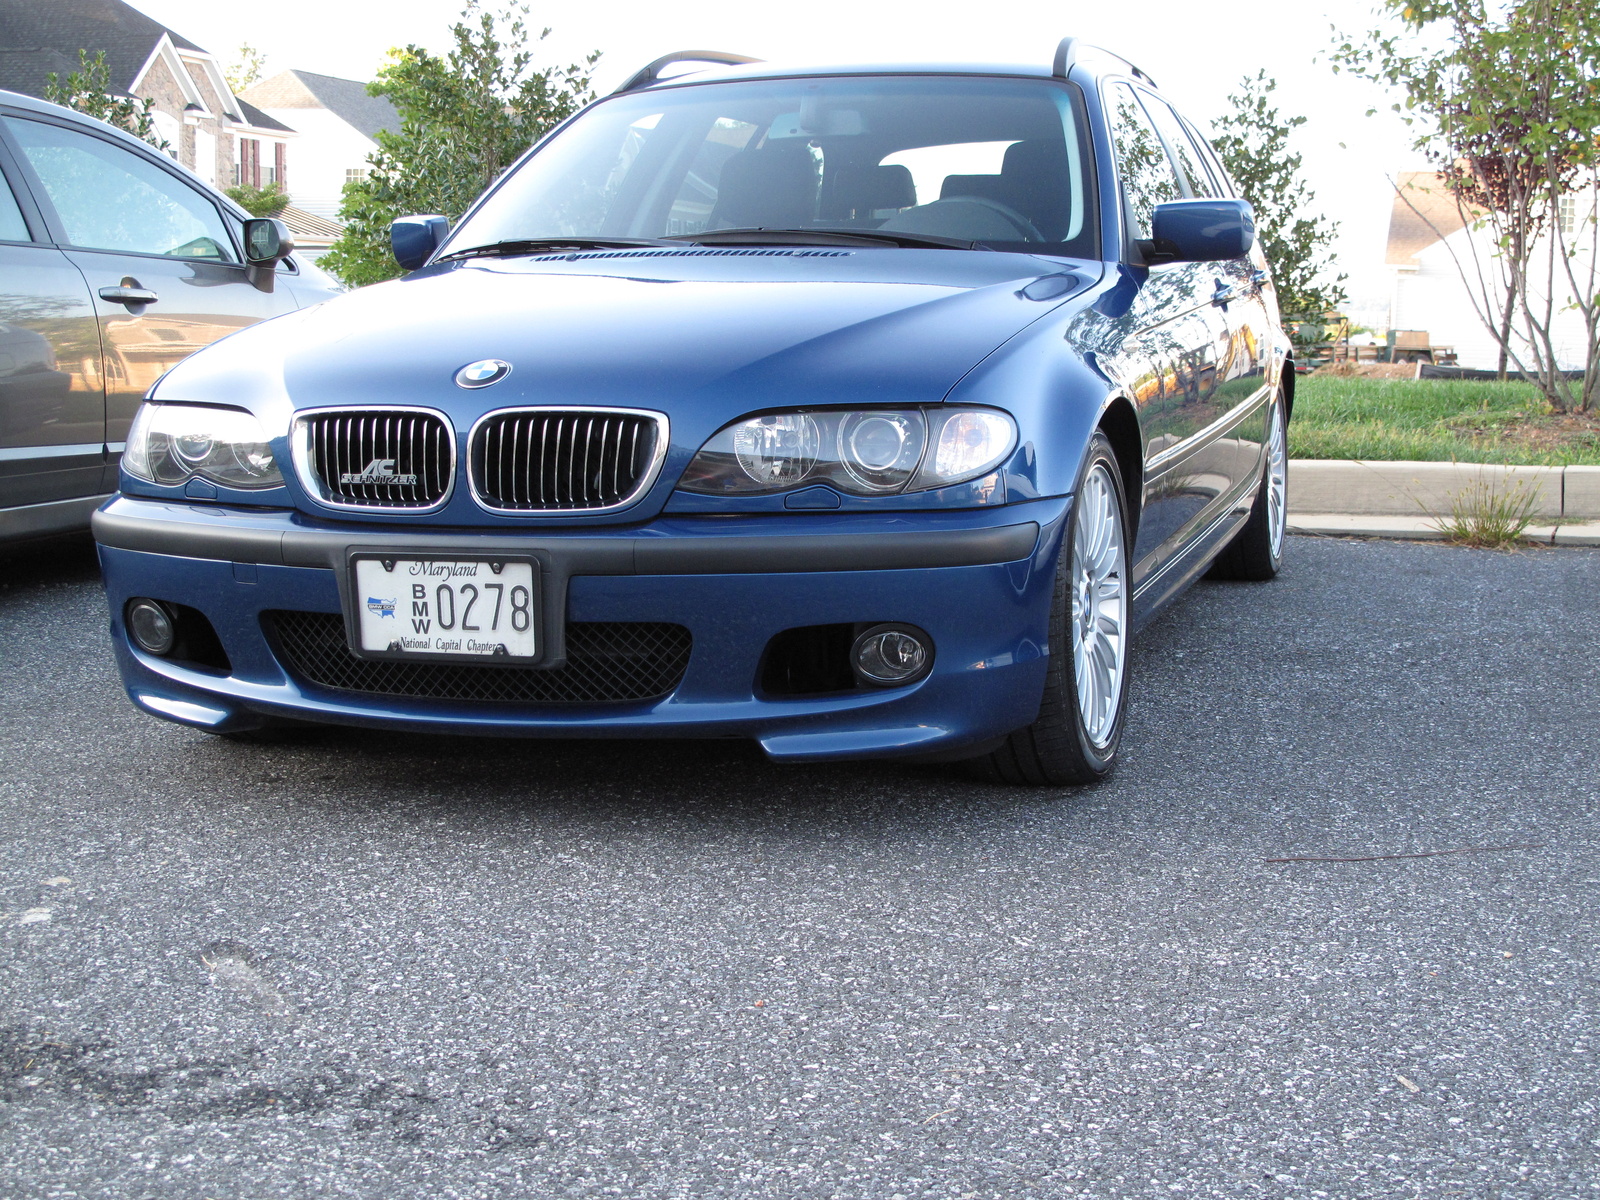 Used 2002 bmw 325xi review #4